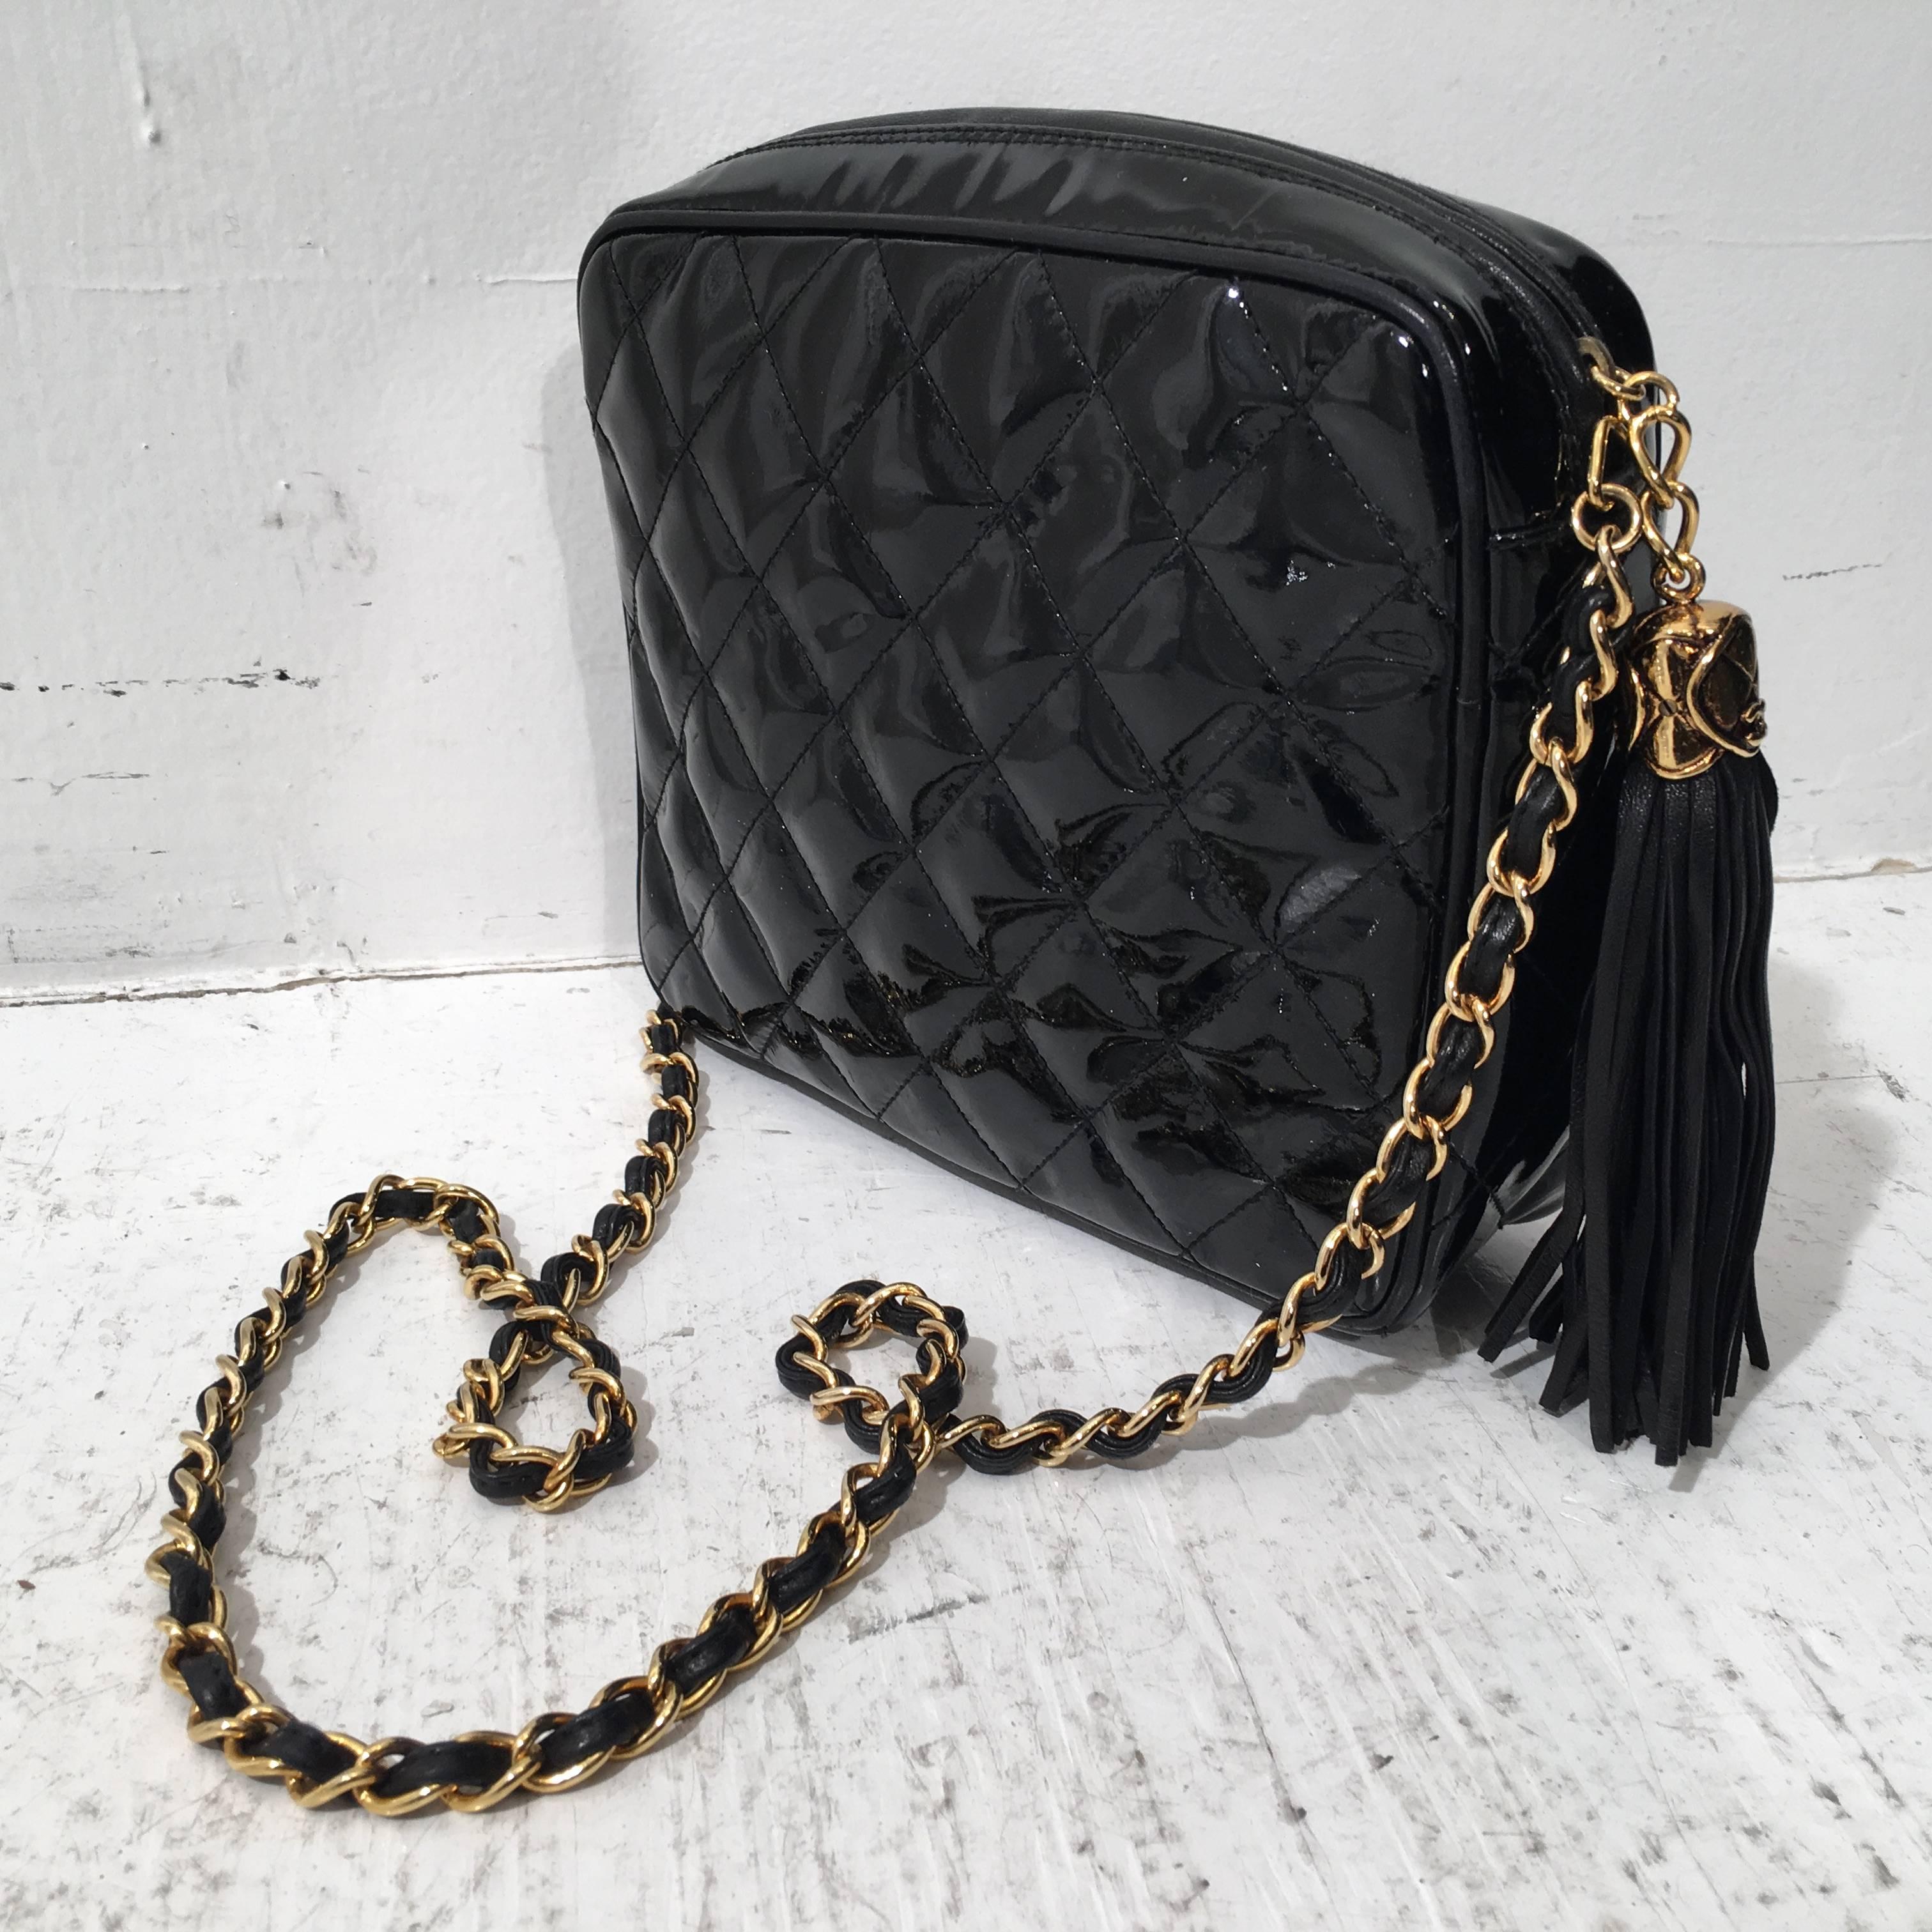 Chanel 1980's vintage quilted patent leather crossbody bag features a diagonal front exterior, flat pocket, the Chanel logo stitched at front, and a zip closure with a leather tassel pull. Gold chain shoulder strap, original box and serial number